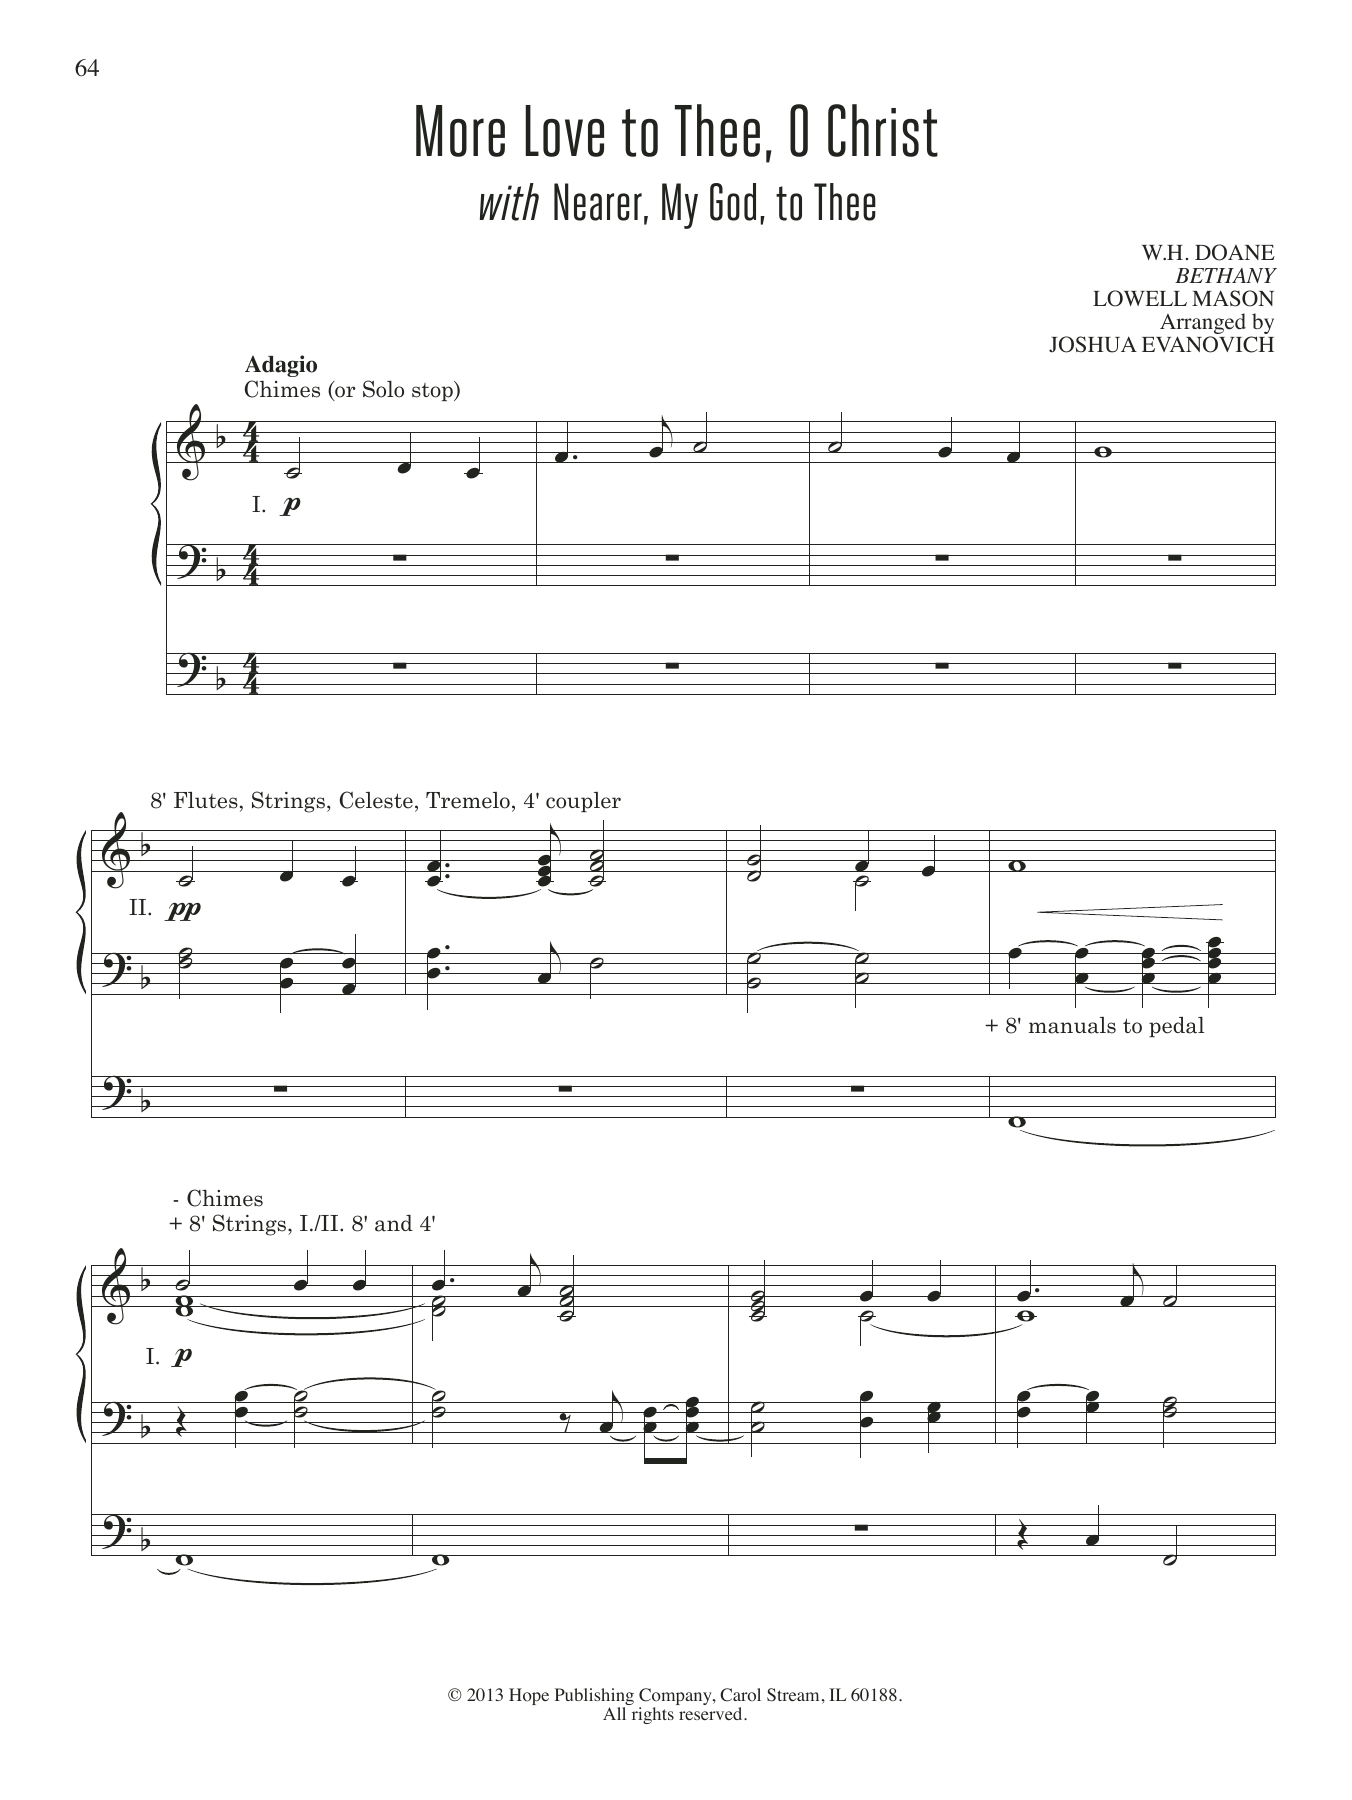 Download Joshua Evanovich More Love to Thee, O Christ with Nearer Sheet Music